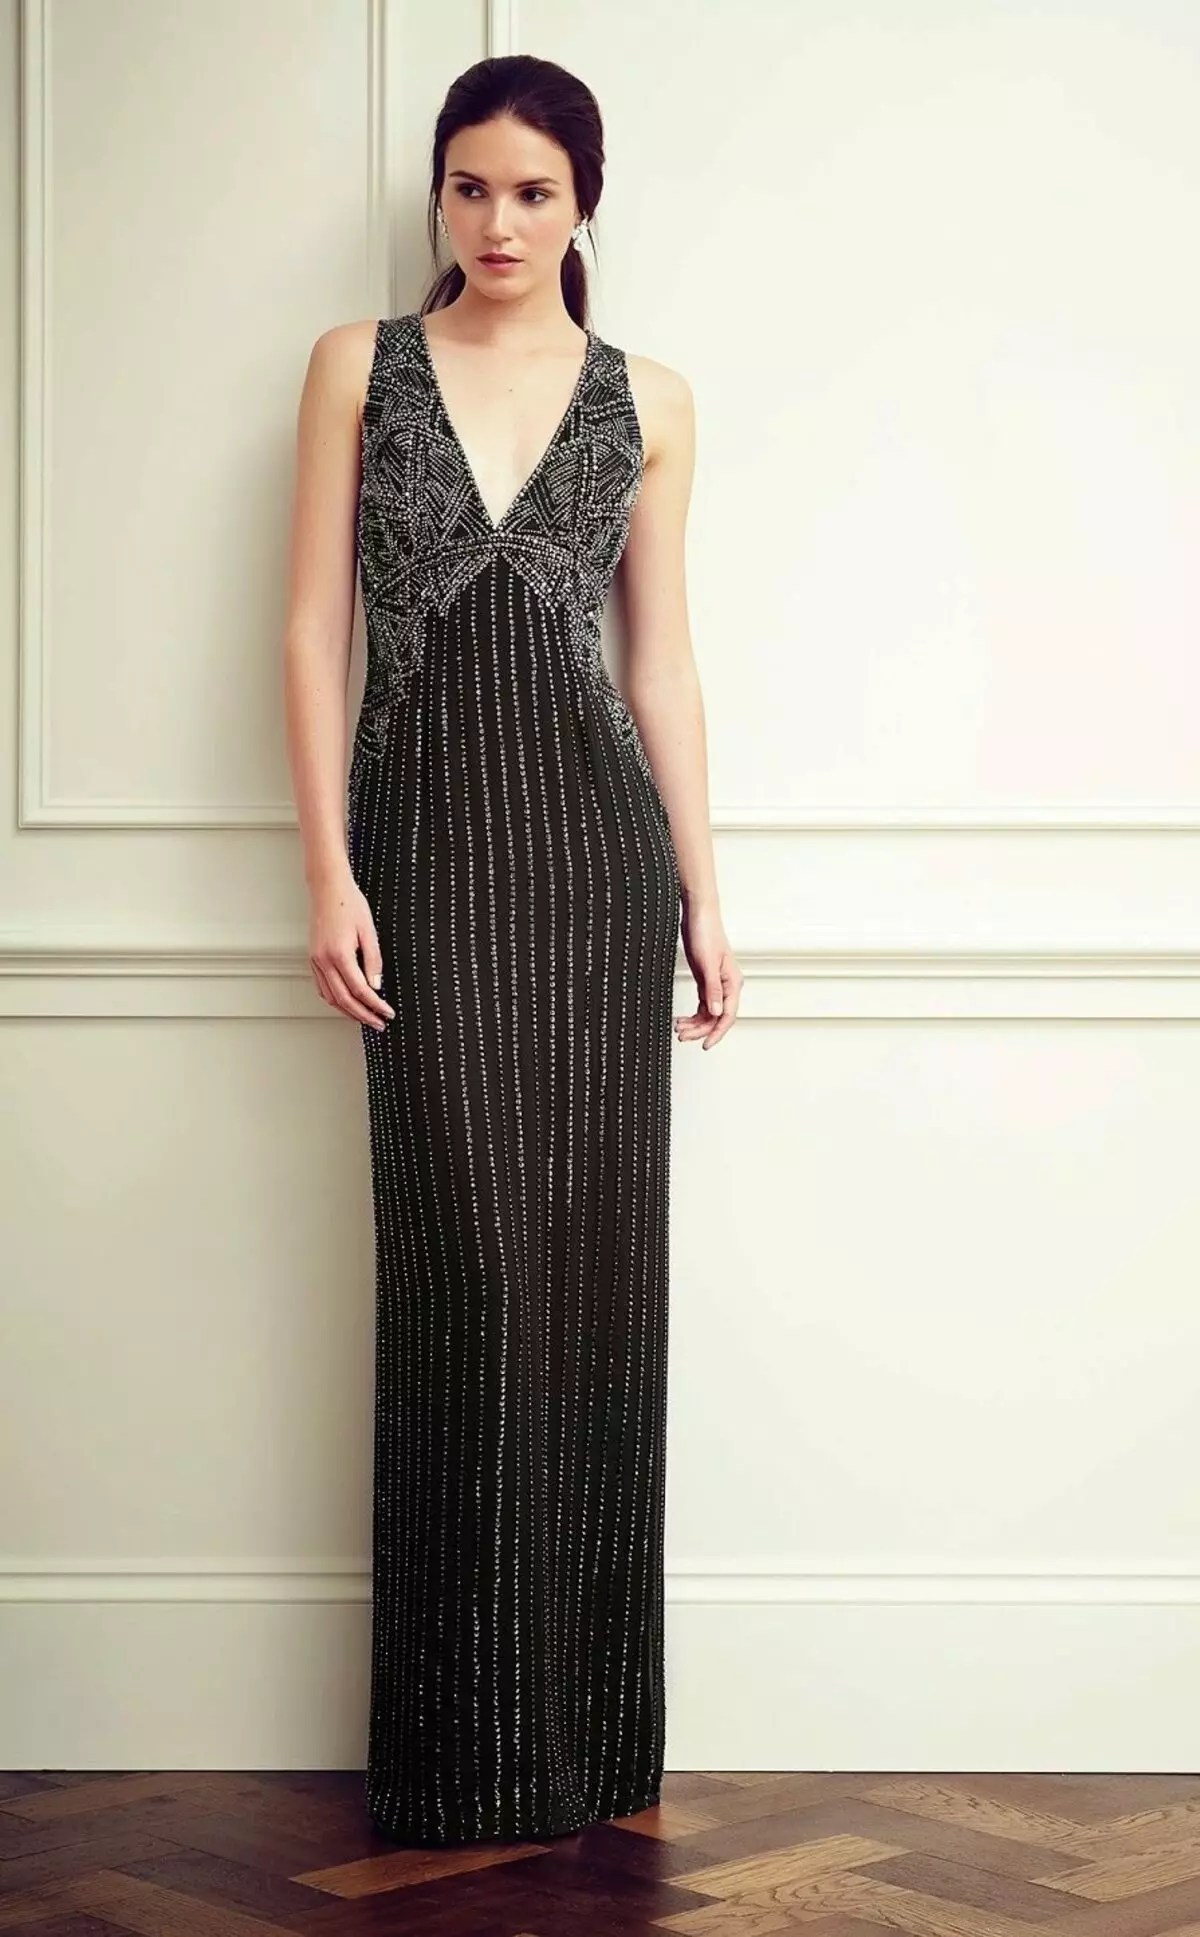 Evening dress with silver thread